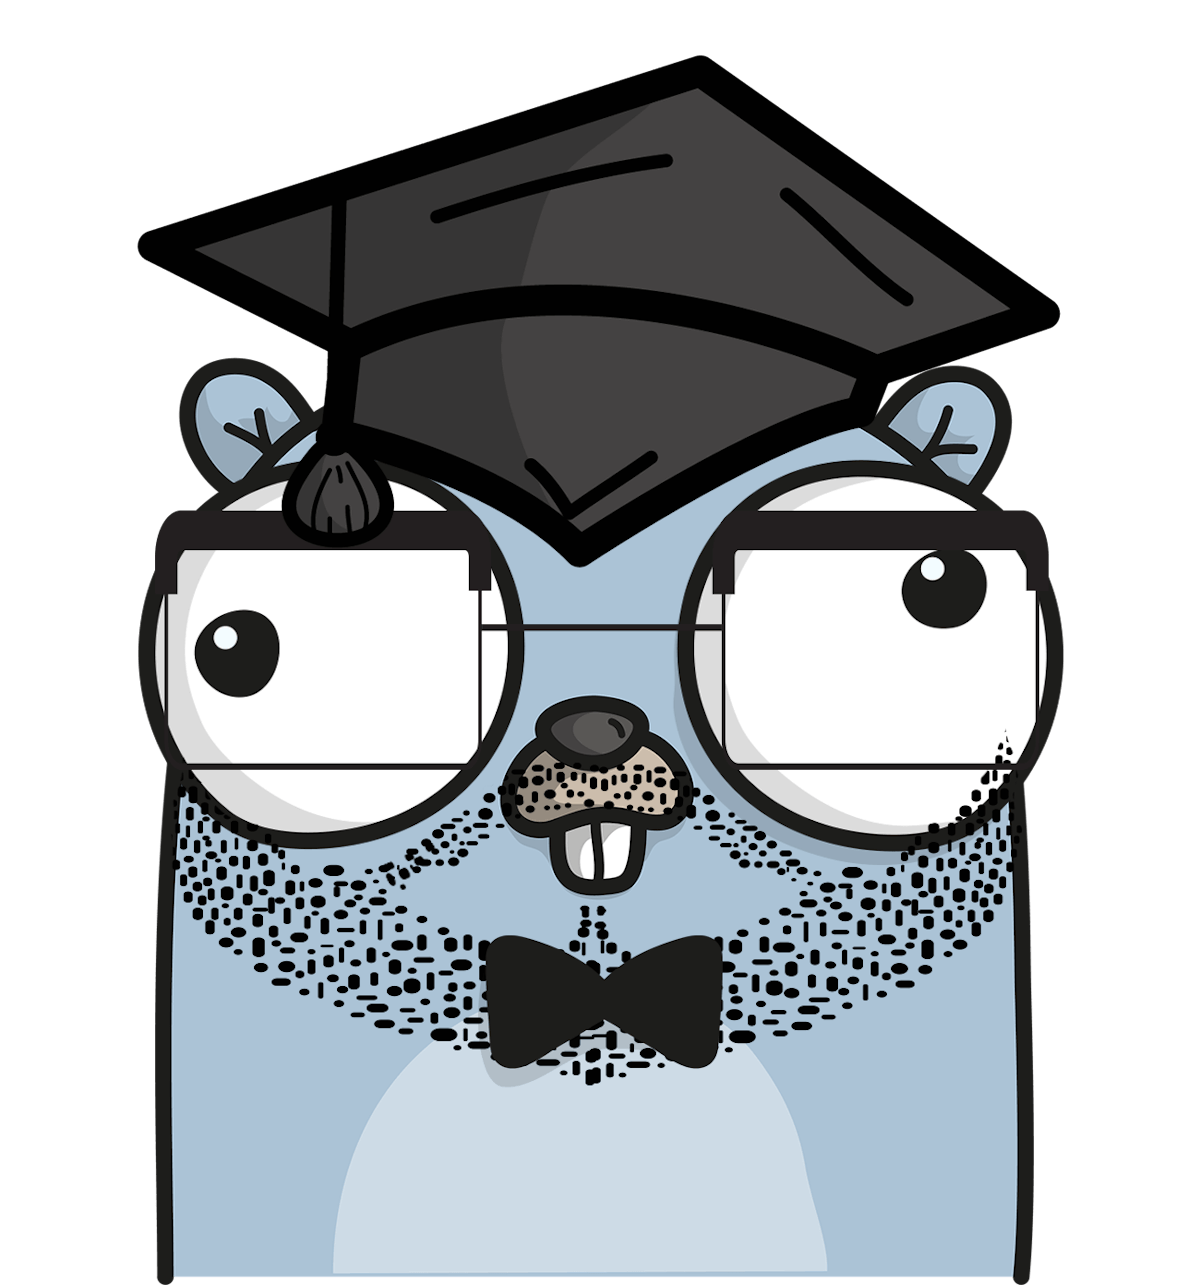 featured image - 3 Golang Pitfalls Every Developer Needs to Know